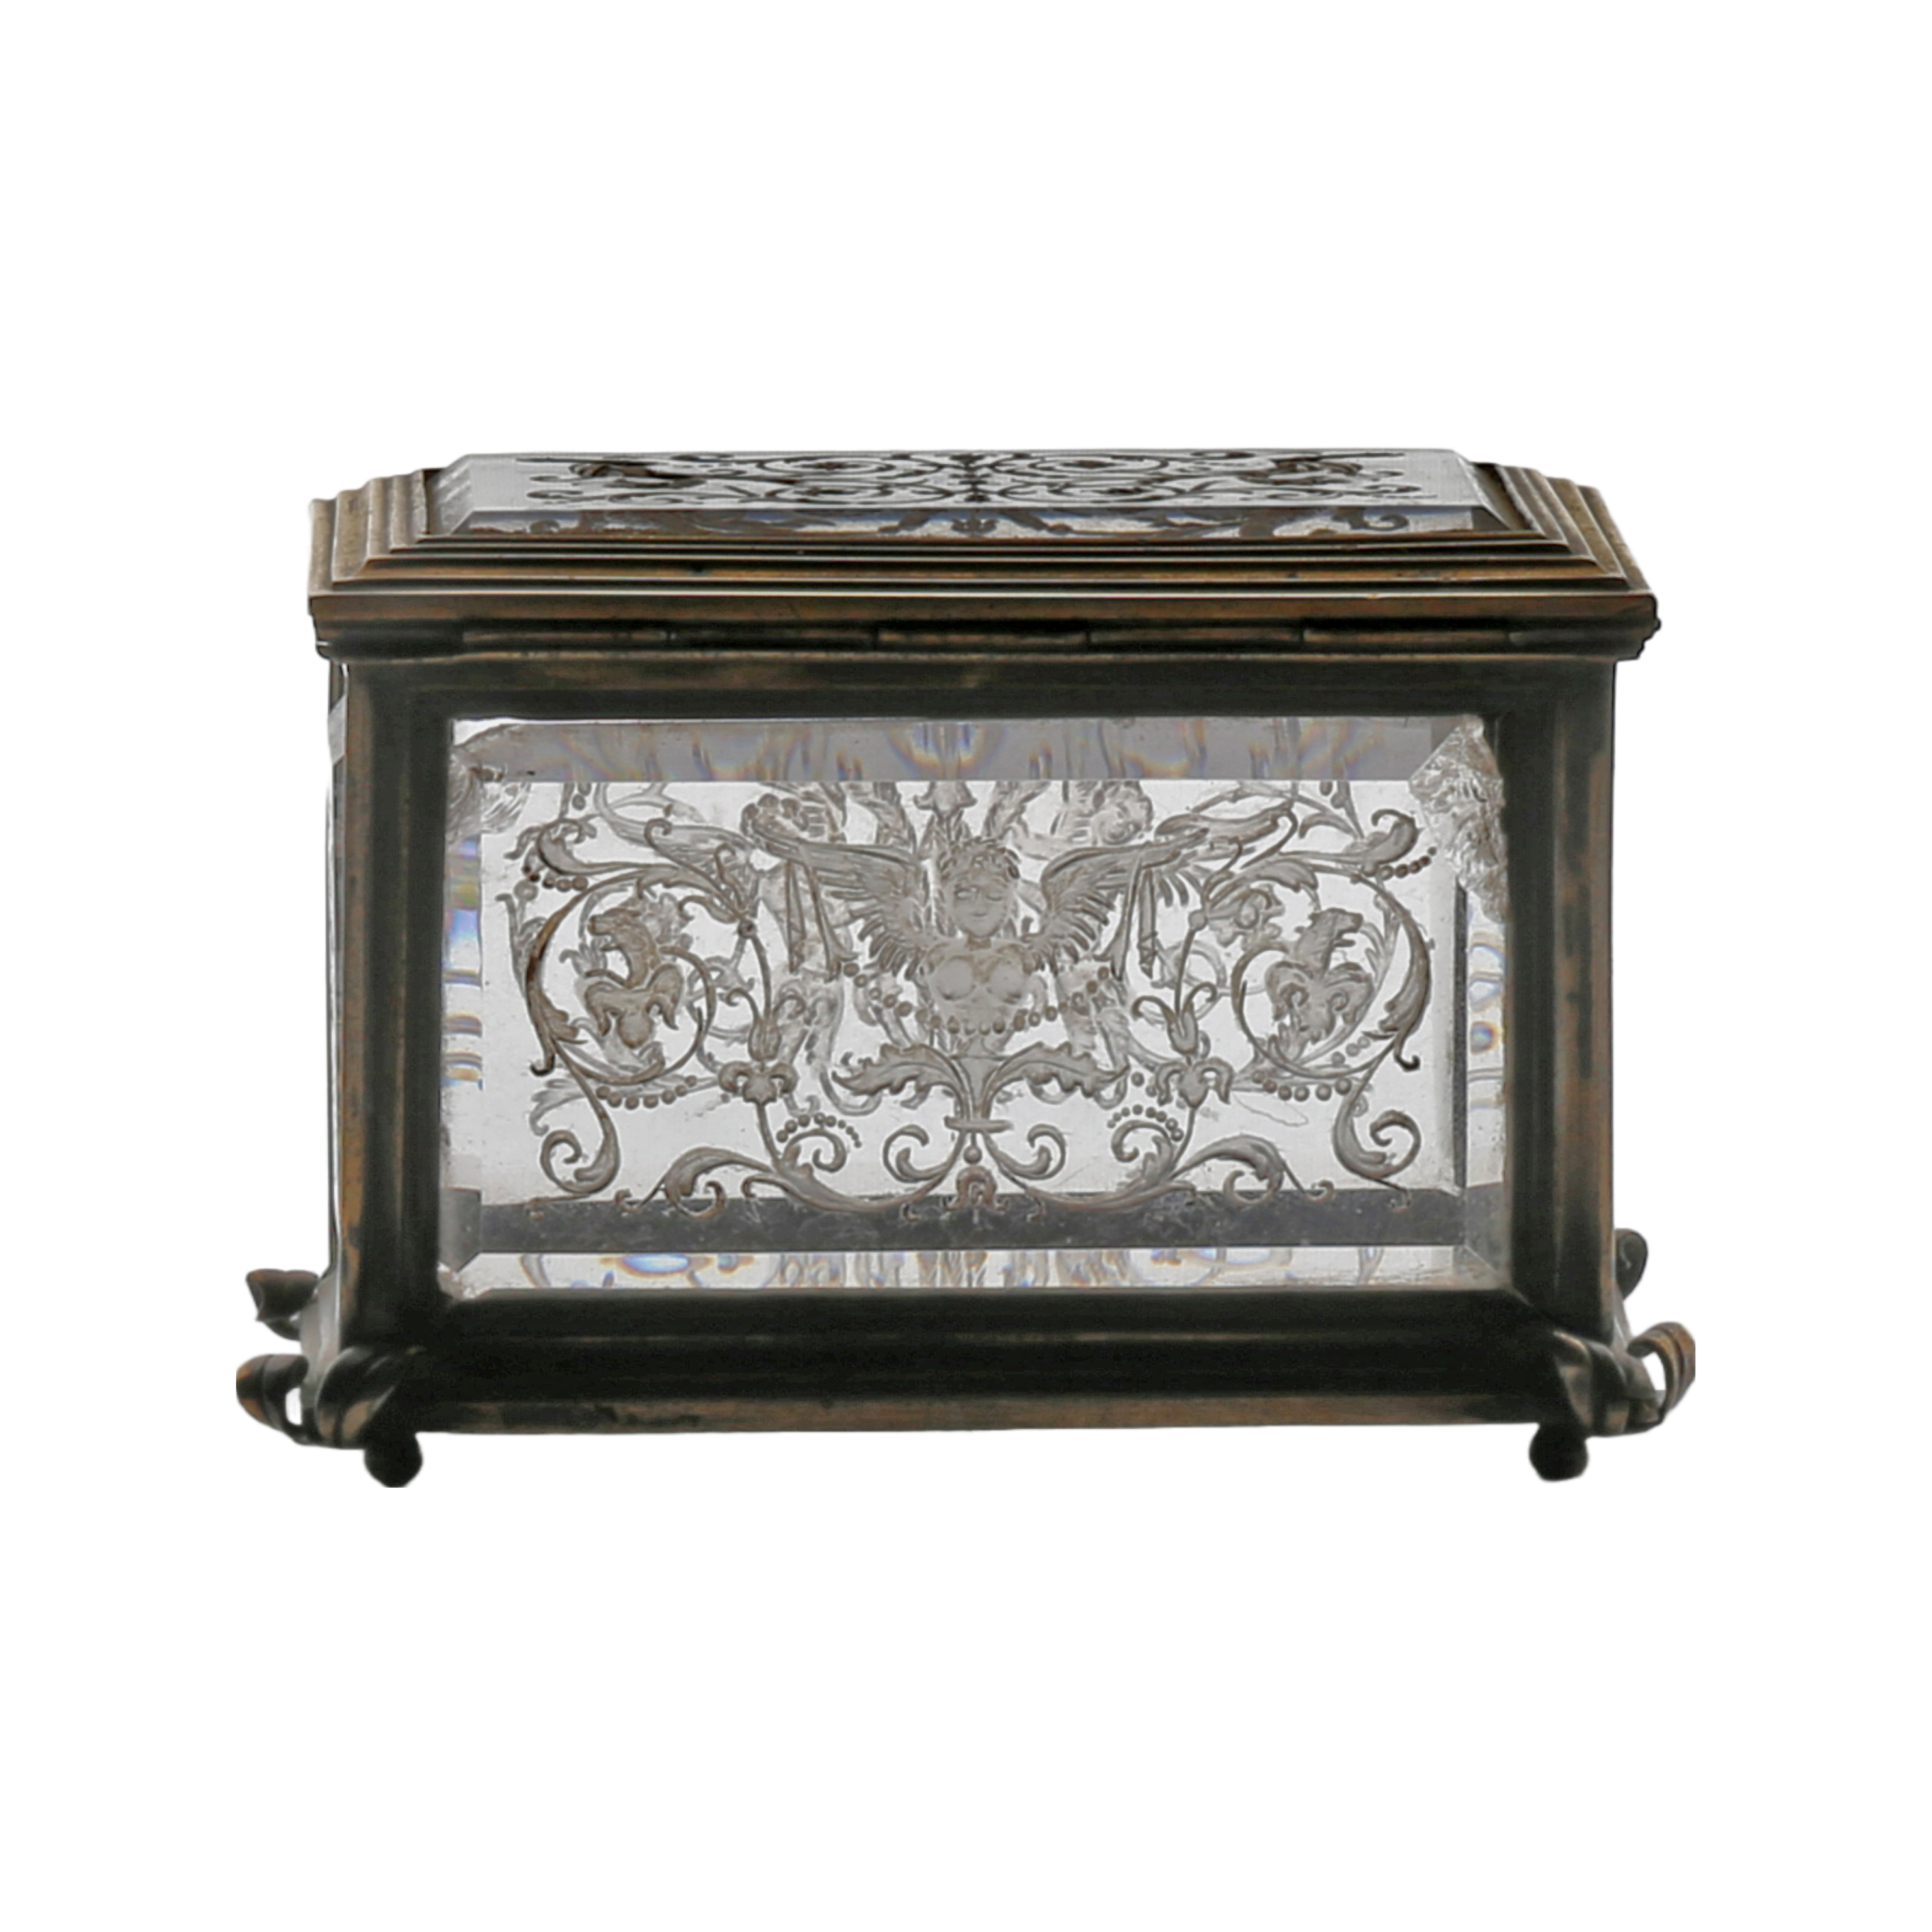 A 19th Century glass and gilt metal jewellery casket, the five bevelled glass panels with etched